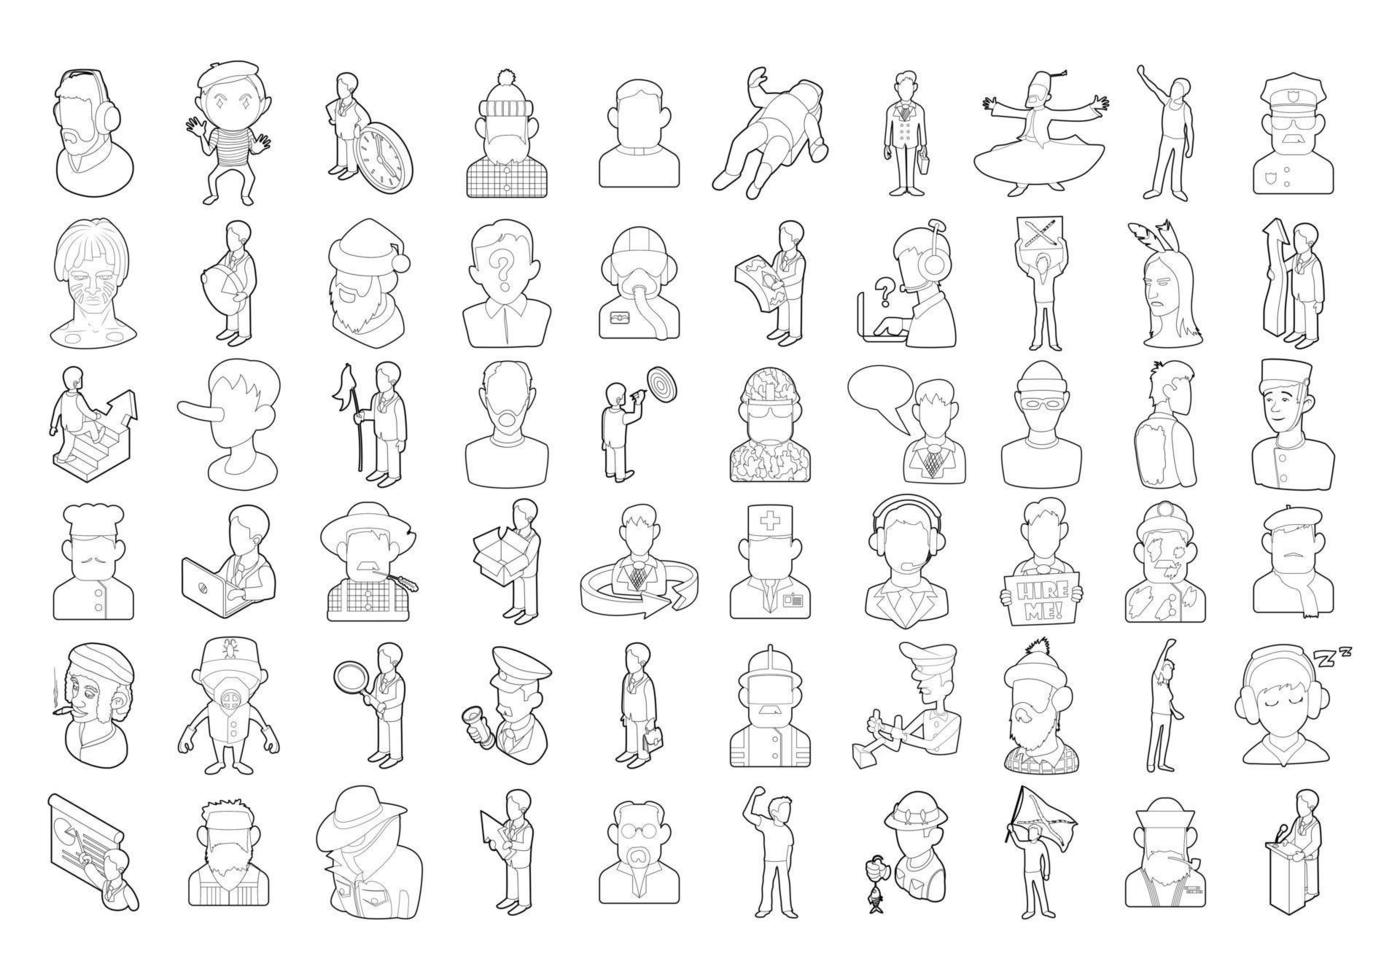 People icon set, outline style vector